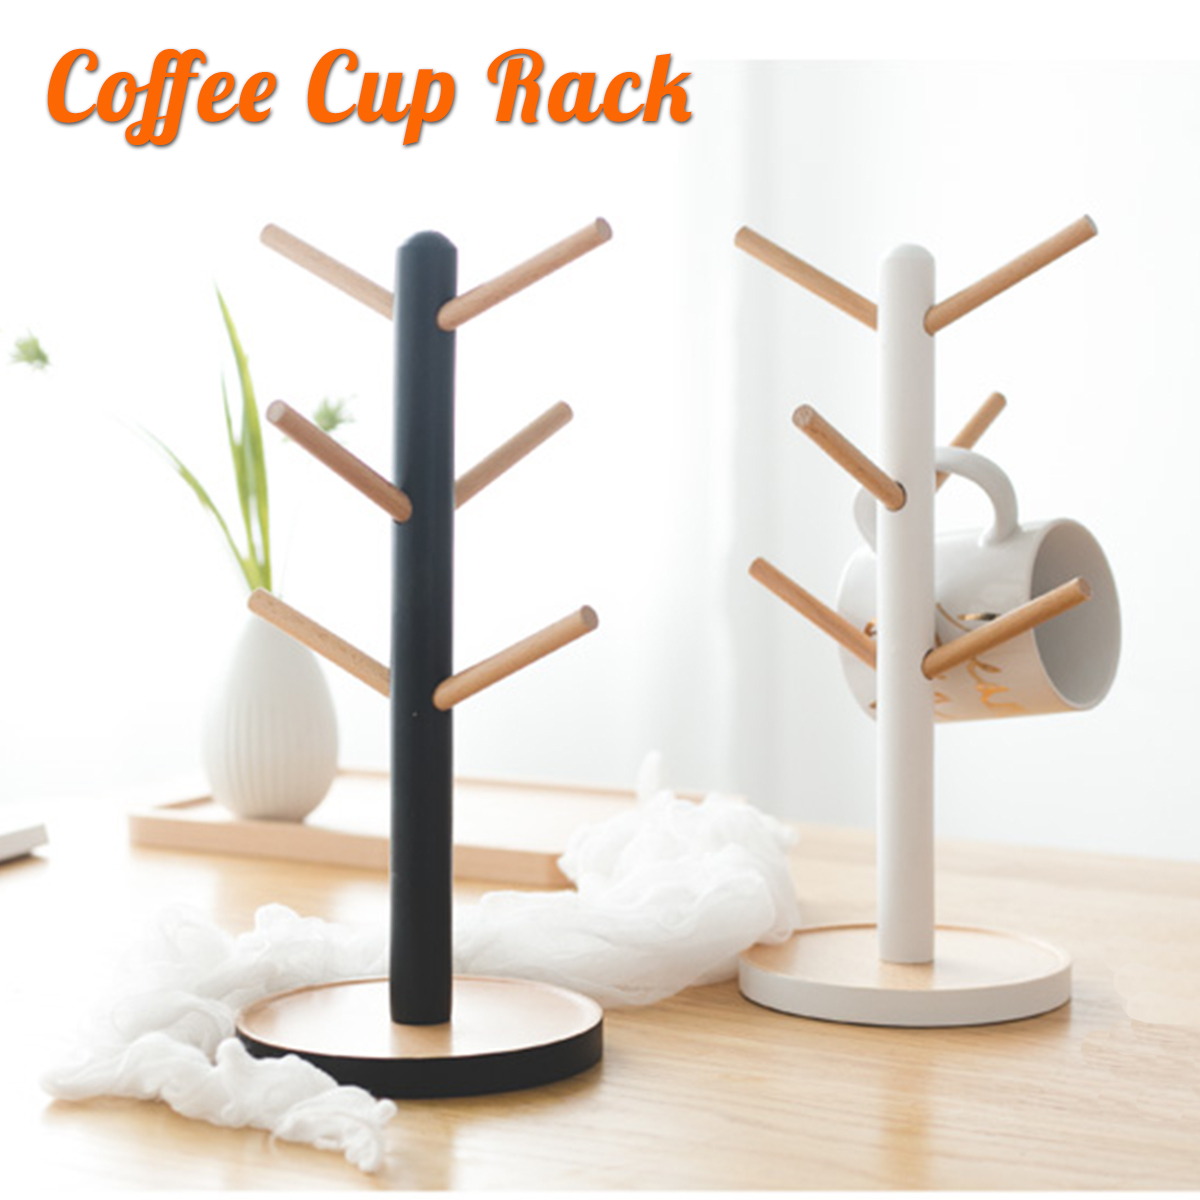 Tree-Branch-Type-Wooden-Cup-Holder-Kitchen-Shelf-For-Coffee-And-Tea-Cup-Draining-1746300-1